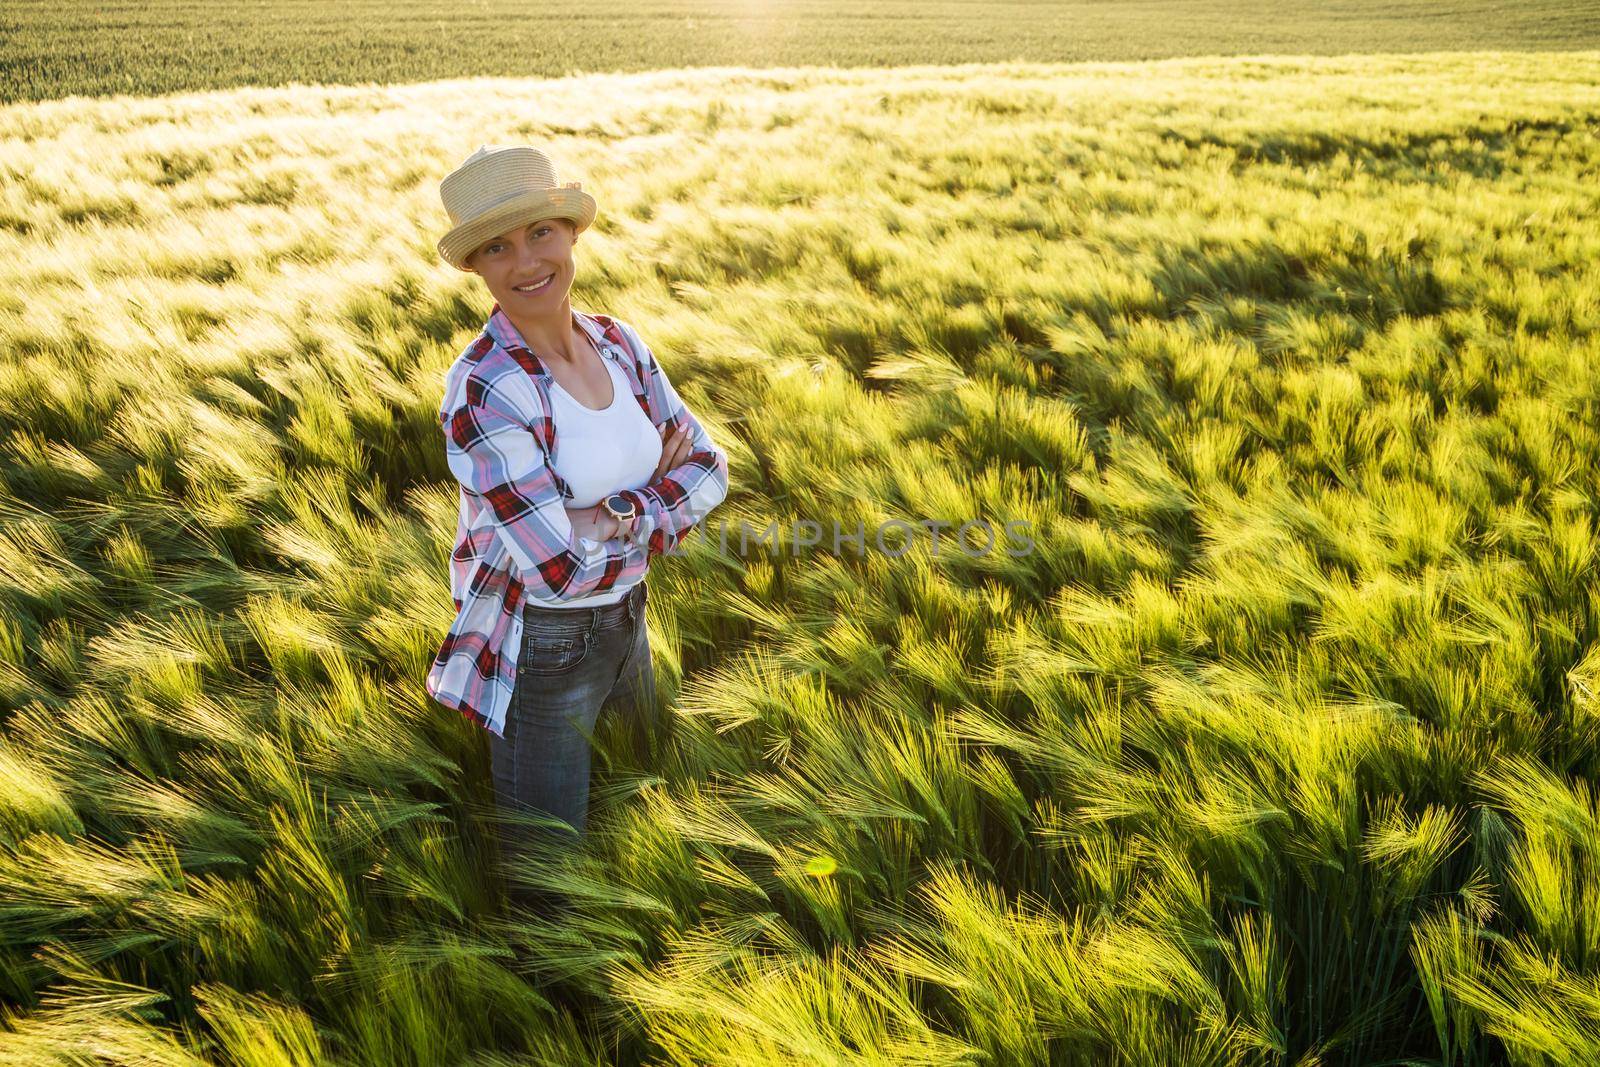 Female farmer is cultivating barley. She is smiling and looking at camera while standing in her barley field.